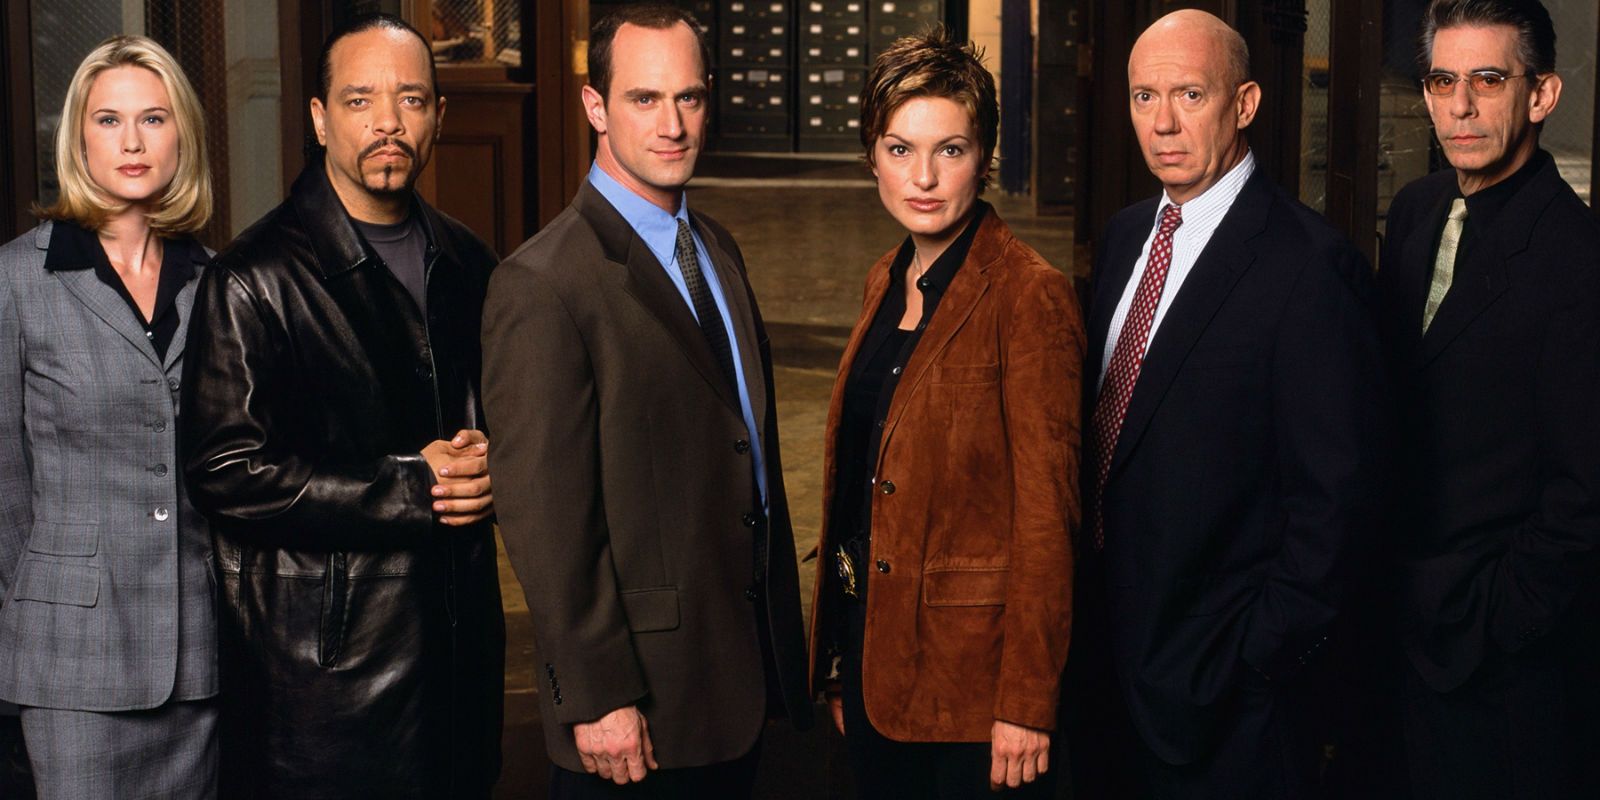 Law and Order Special Victims Unit cast